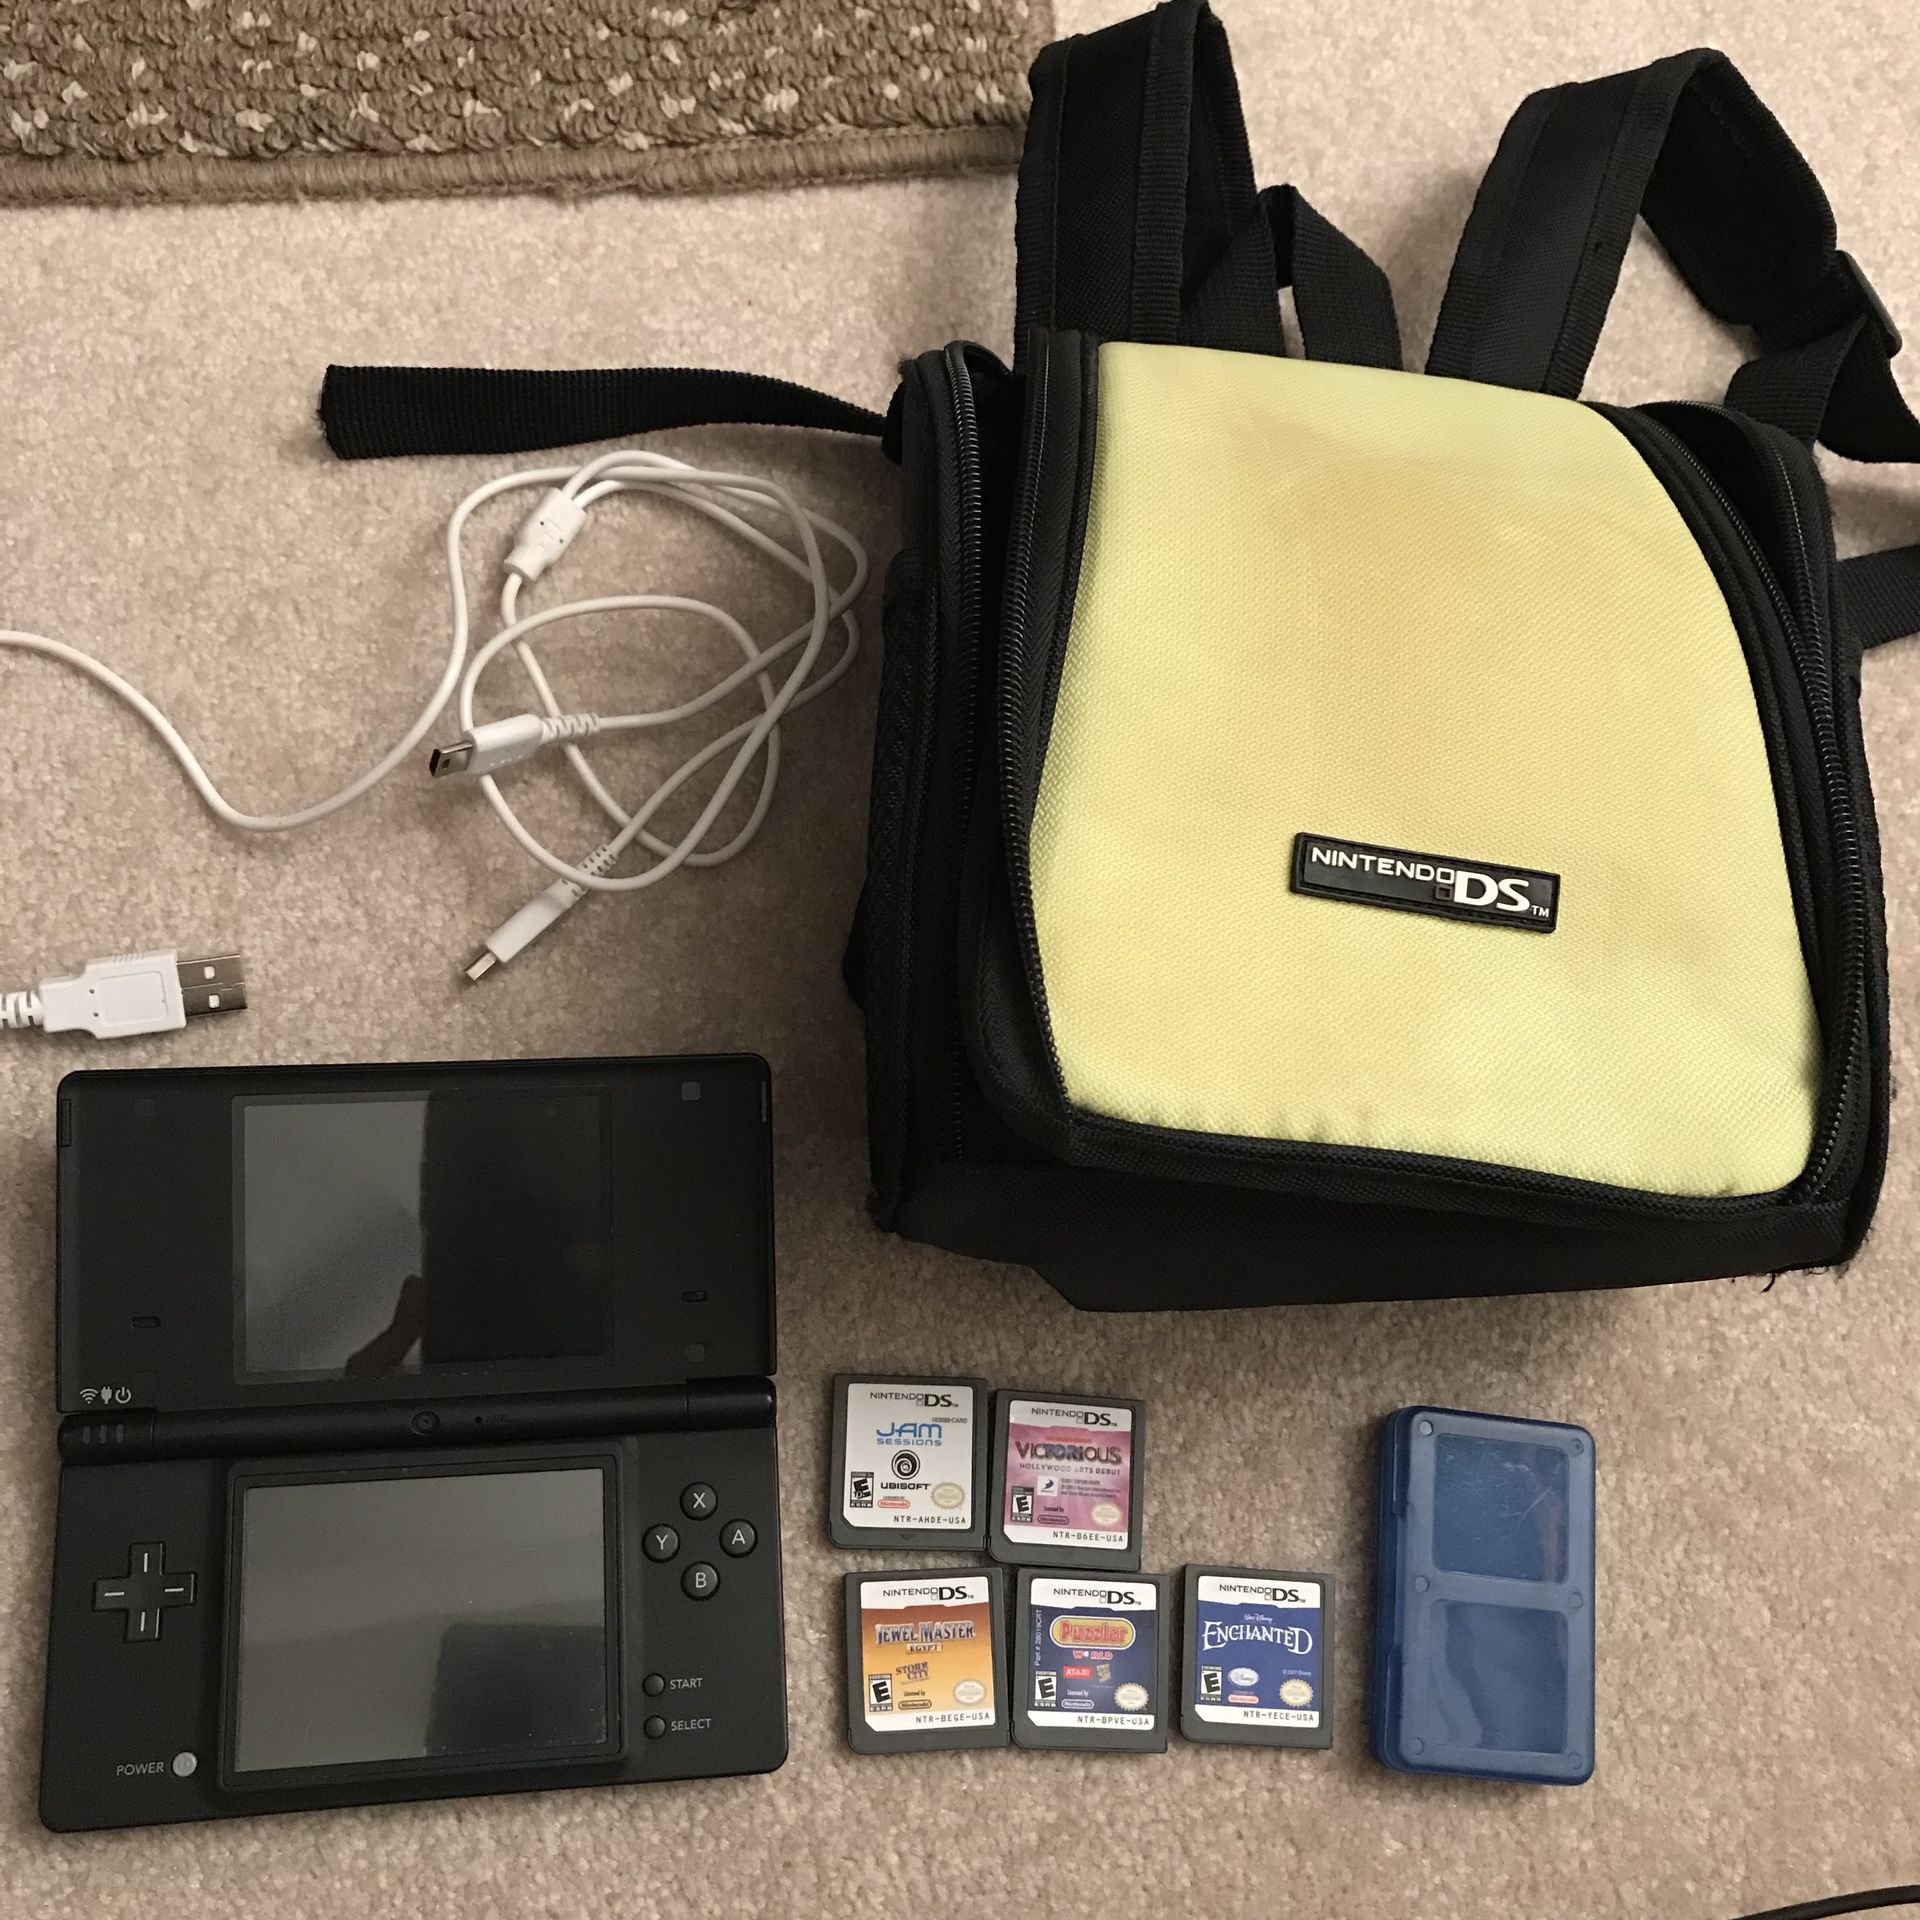 Nintendo dsi handheld system 5 games and carrying bag